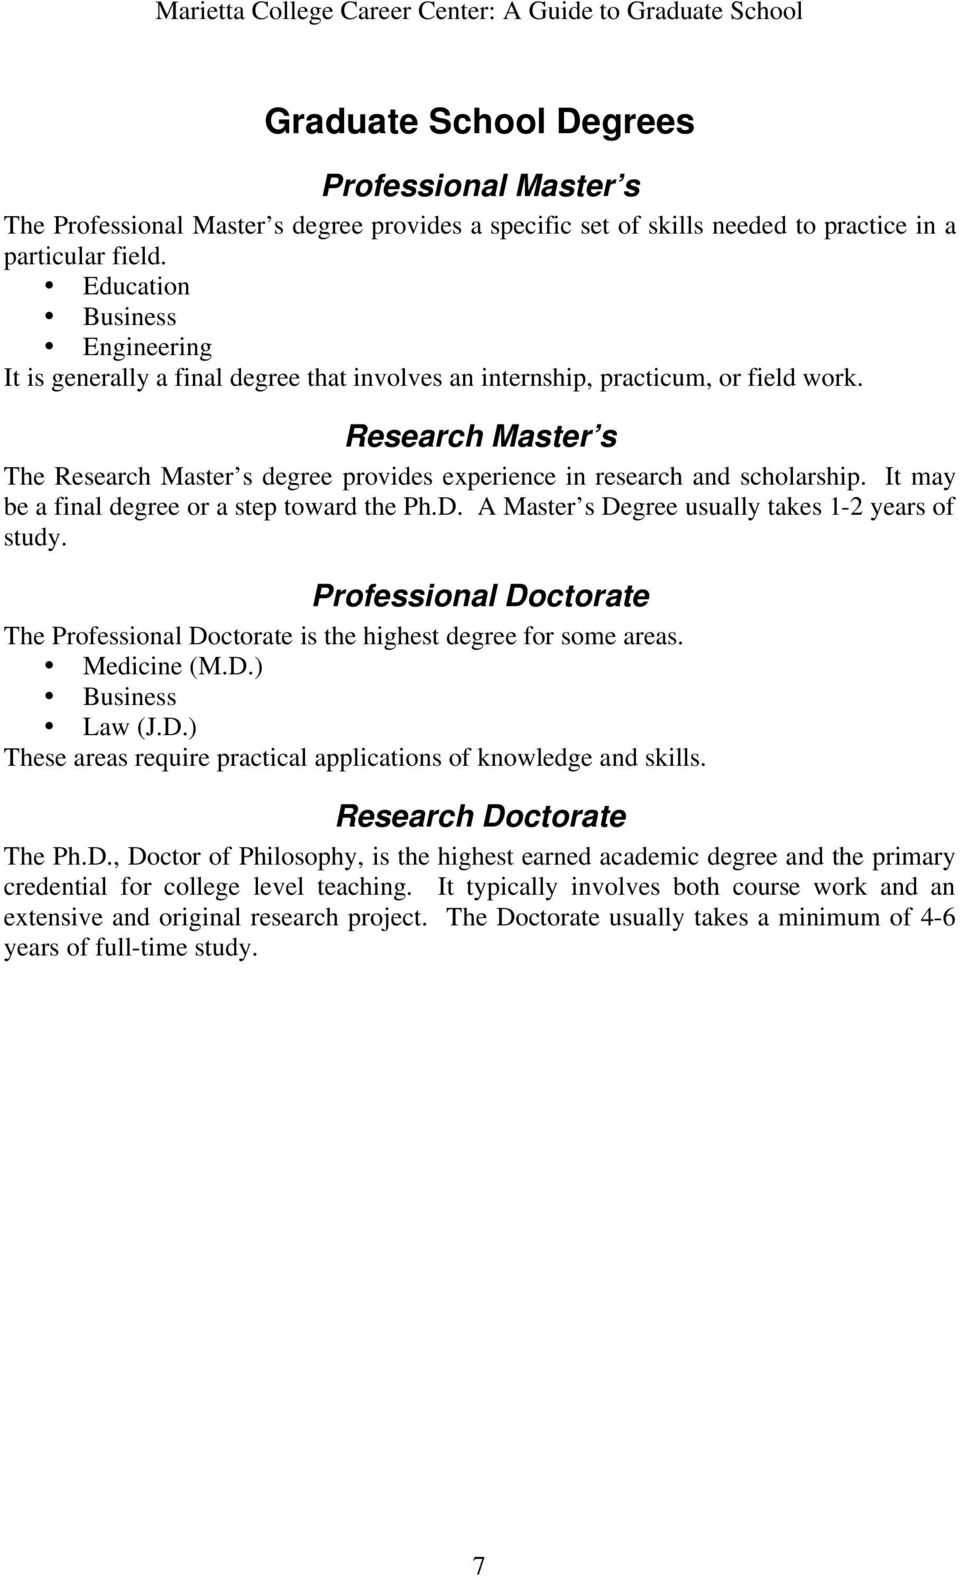 Research Master s The Research Master s degree provides experience in research and scholarship. It may be a final degree or a step toward the Ph.D. A Master s Degree usually takes 1-2 years of study.